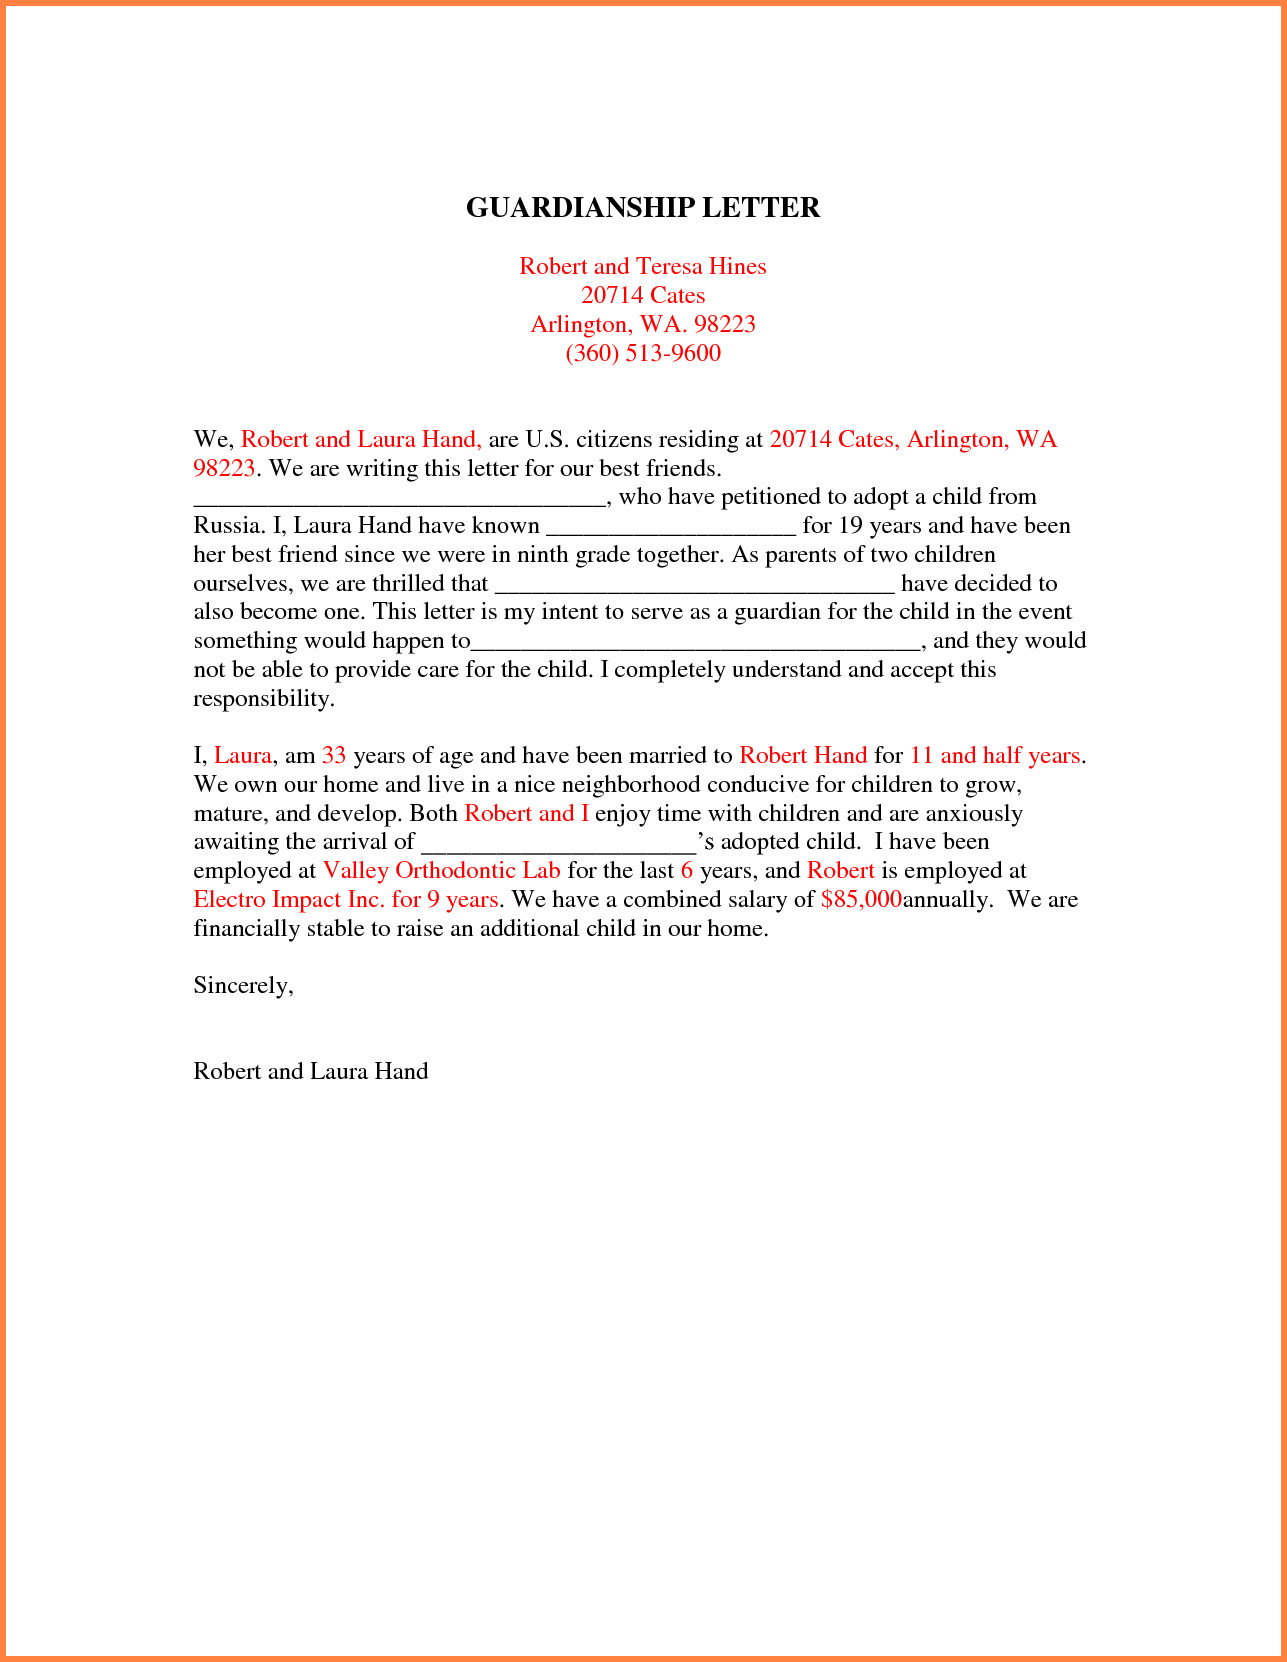 letter-of-guardianship-template